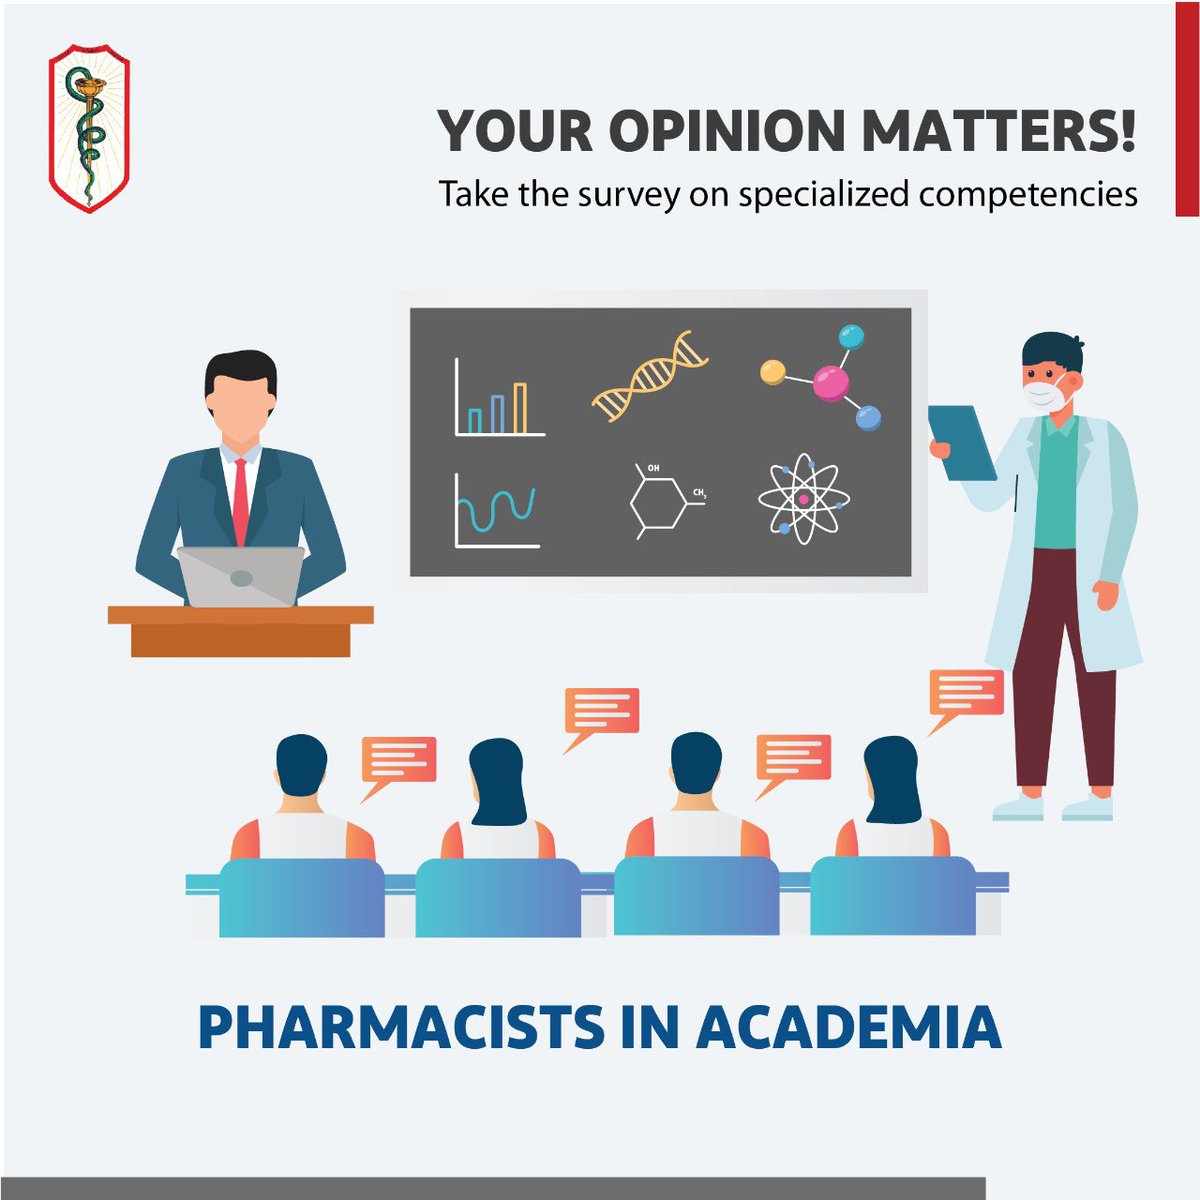 Contribute to the advancement of the profession. Fill out the survey about specialized competencies and help us identify your needs. YOUR OPINION MATTERS! Academia Pharmacist: forms.gle/bU3PzXhZCeJFEA… Clinical Preceptor: forms.gle/YfeRW6GRHgLVdt… #oplscientificcommittee